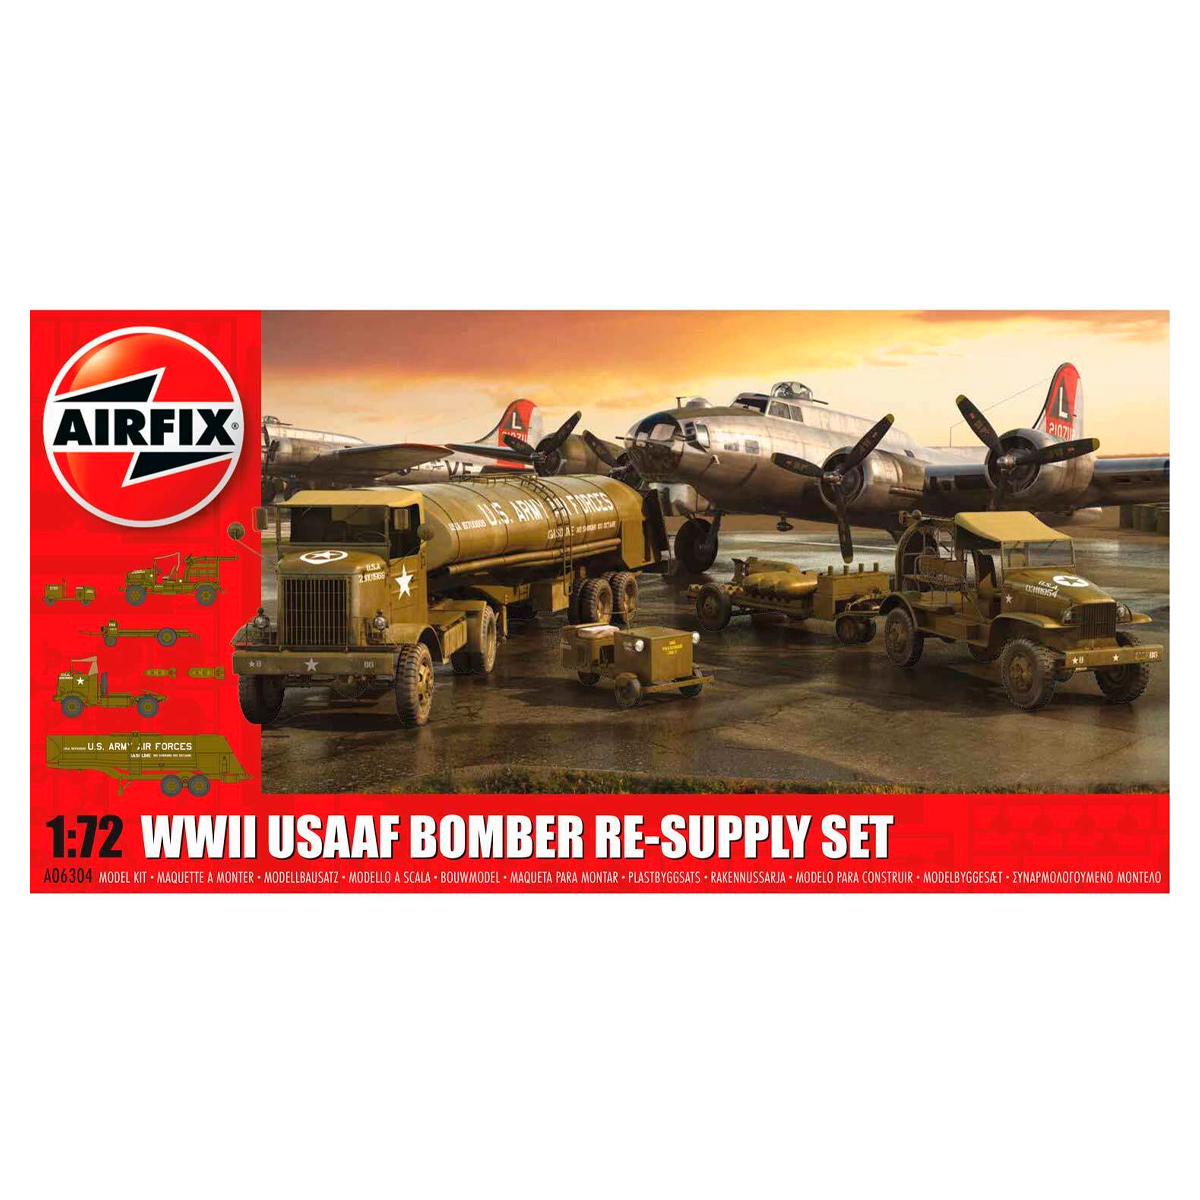 WWII USAAF 8th Bomber Resupply Set 1/72